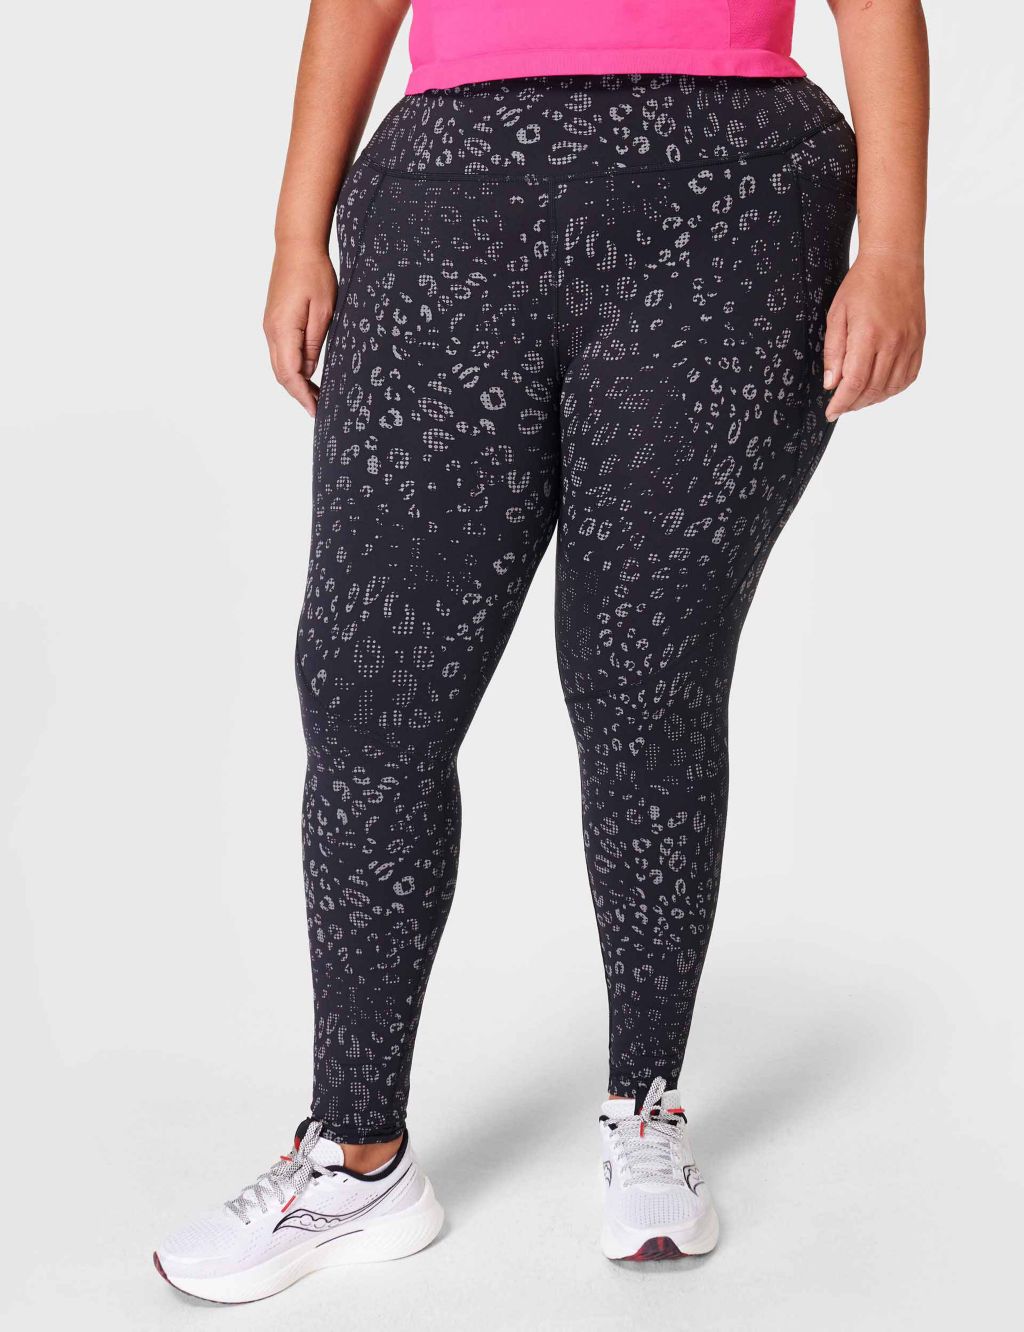 MARKS AND SPENCER Ladies Black Leggings with Leopard Print Stripe new  without ta £11.99 - PicClick UK